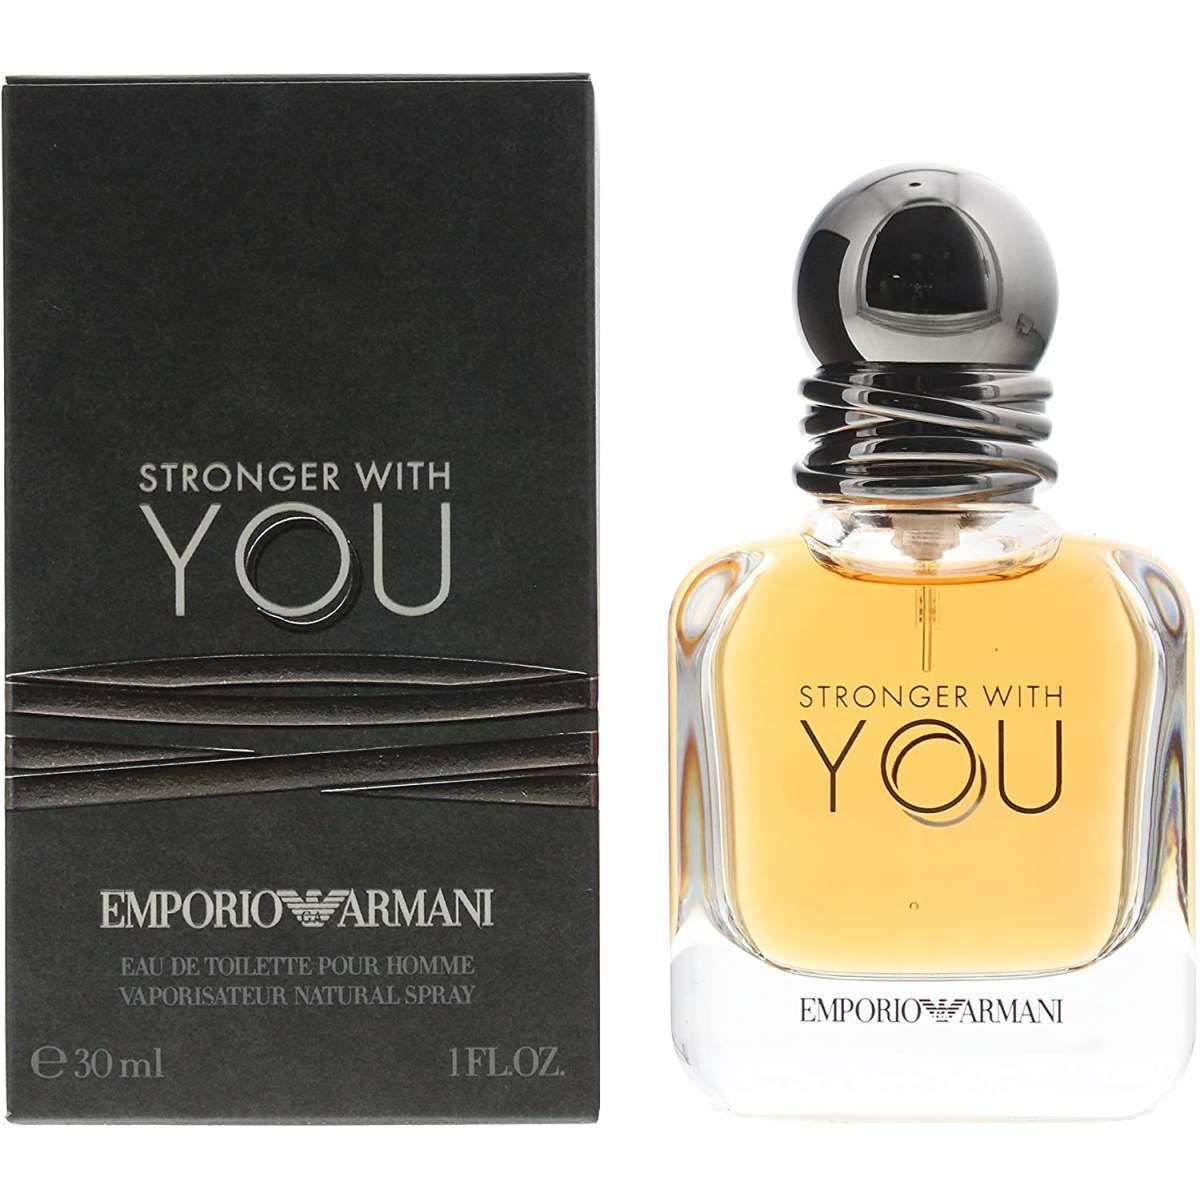 Stronger with you 30 ml